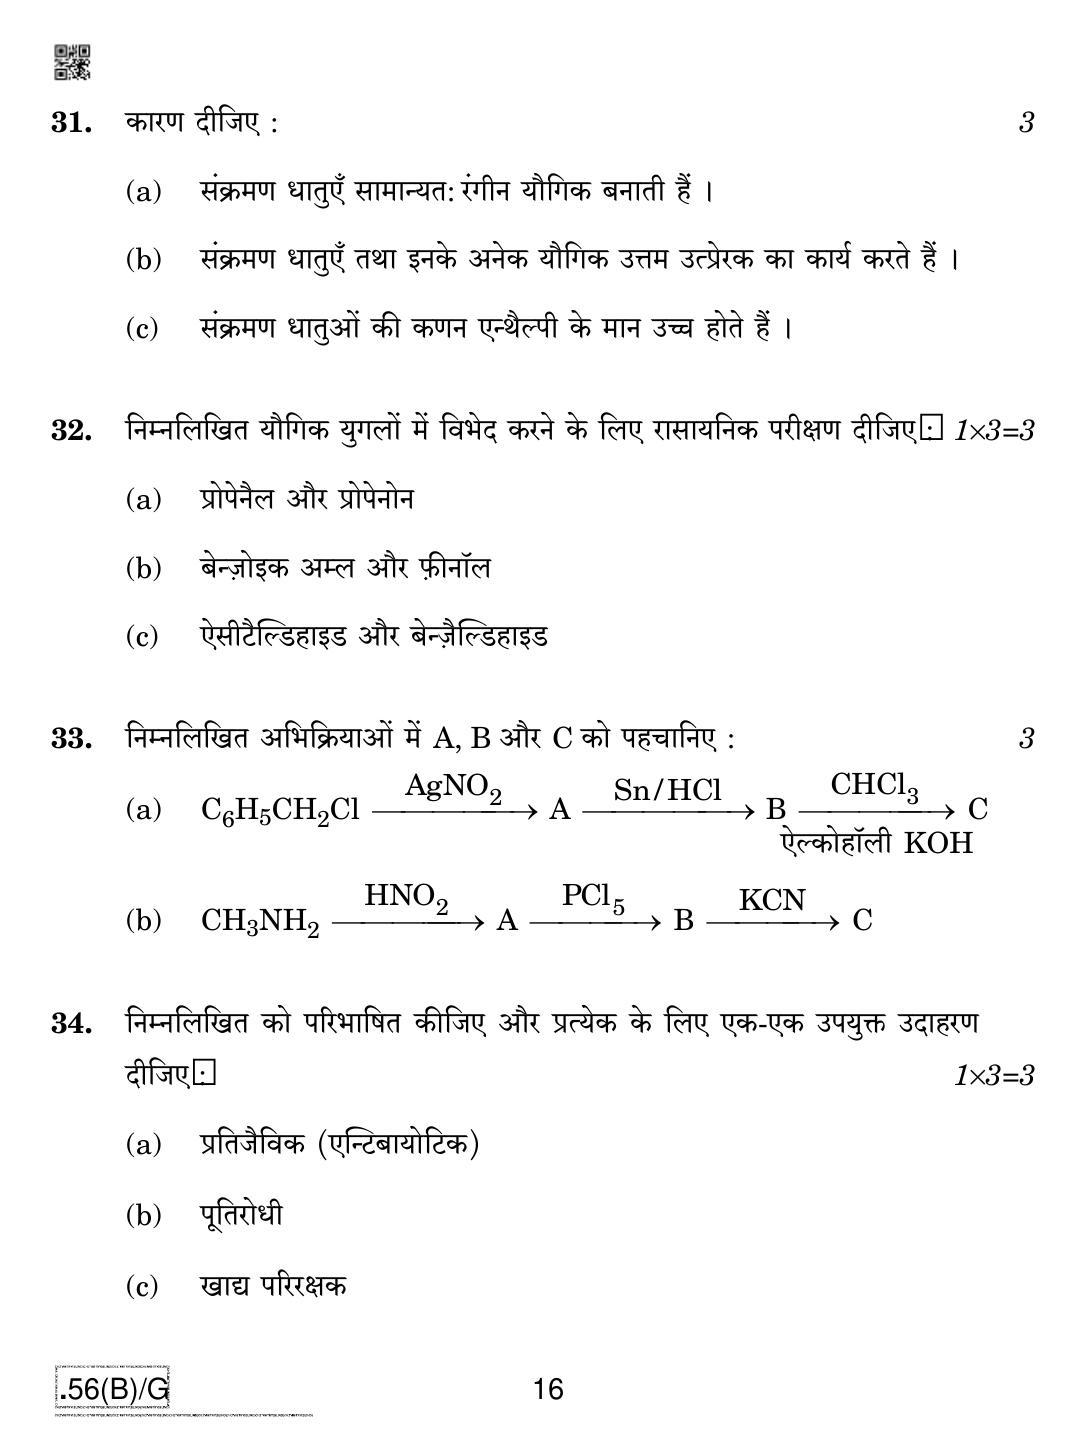 CBSE Class 12 56(B)-C - Chemistry For Blind Candidates 2020 Compartment Question Paper - Page 16